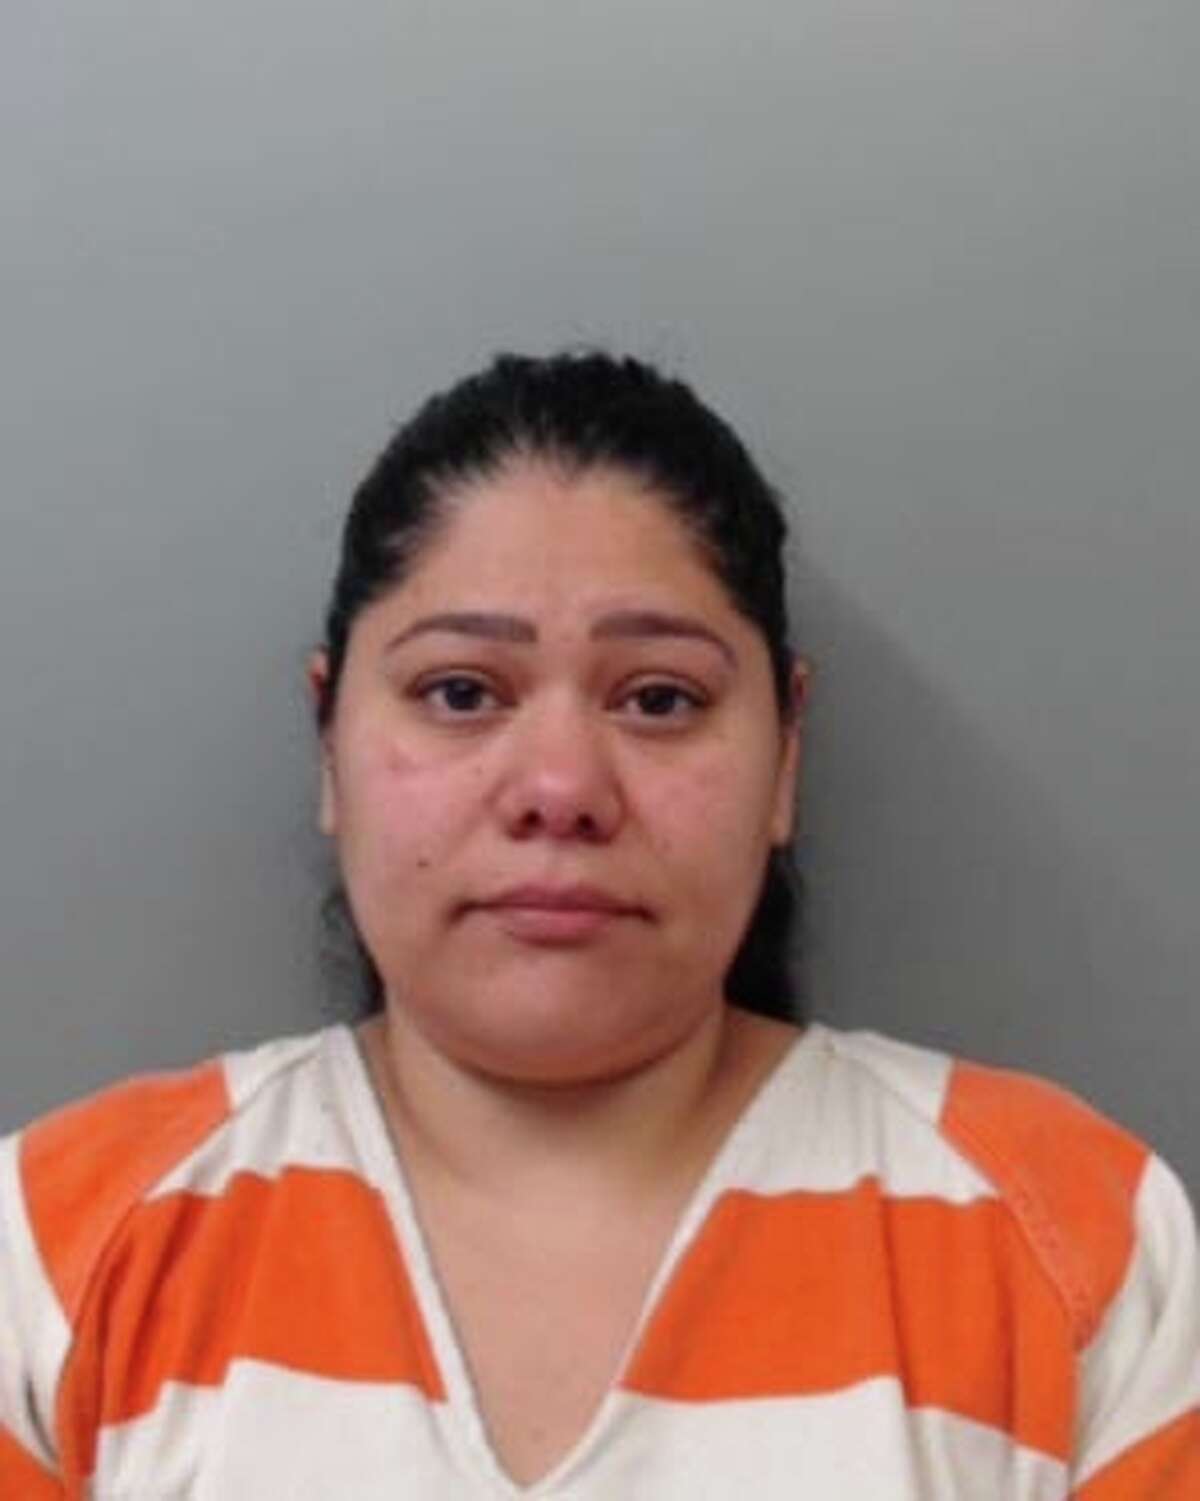 Genitza Jenny Fernandez, 37, was charged with injury to a child and endangerment of a child.